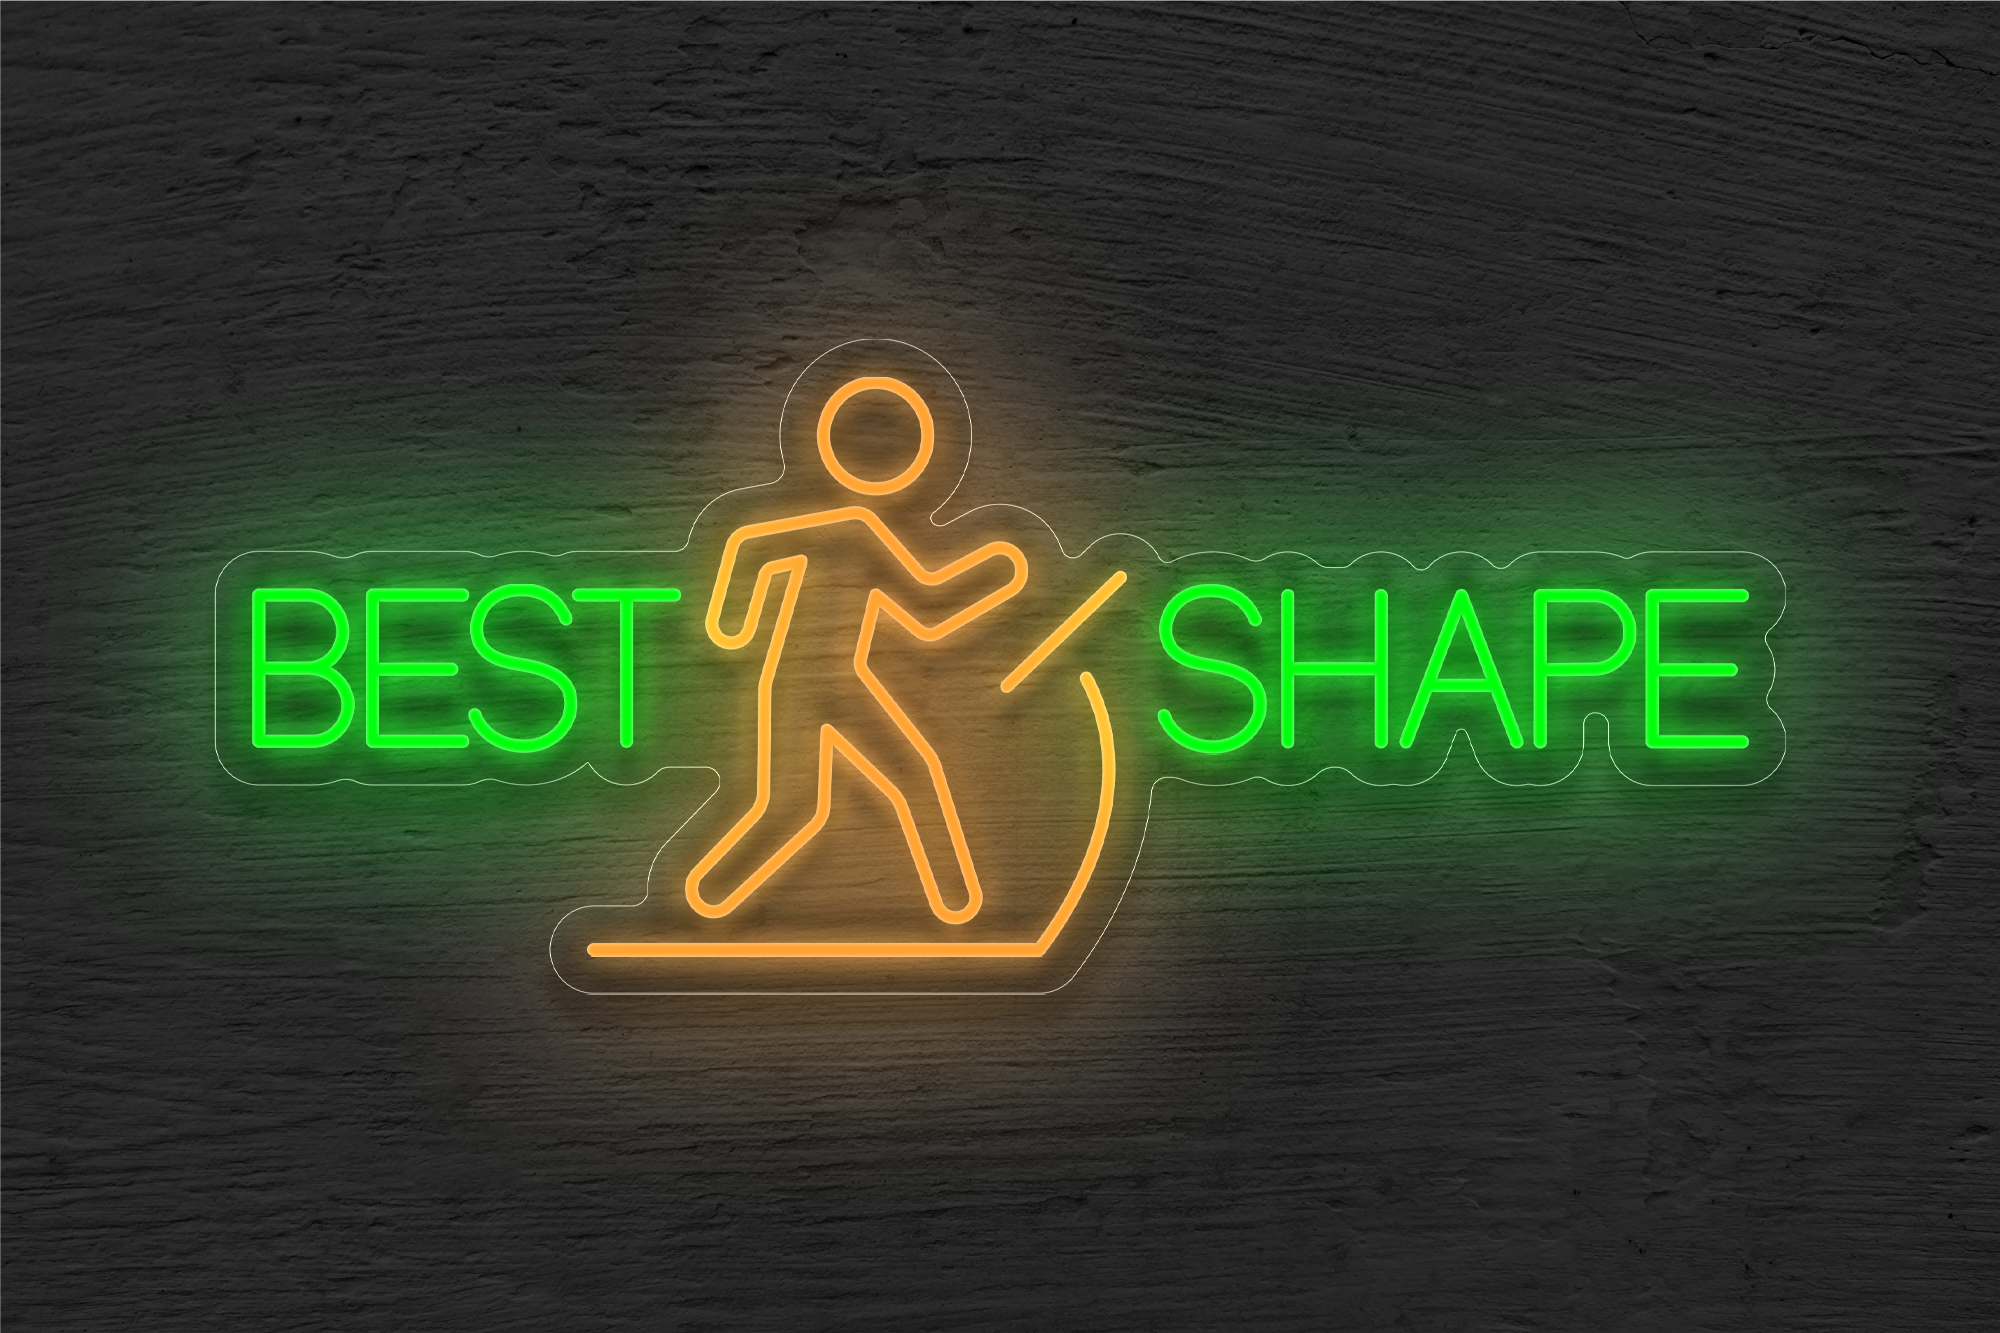 "BEST SHAPE" with Walking Image LED Neon Sign